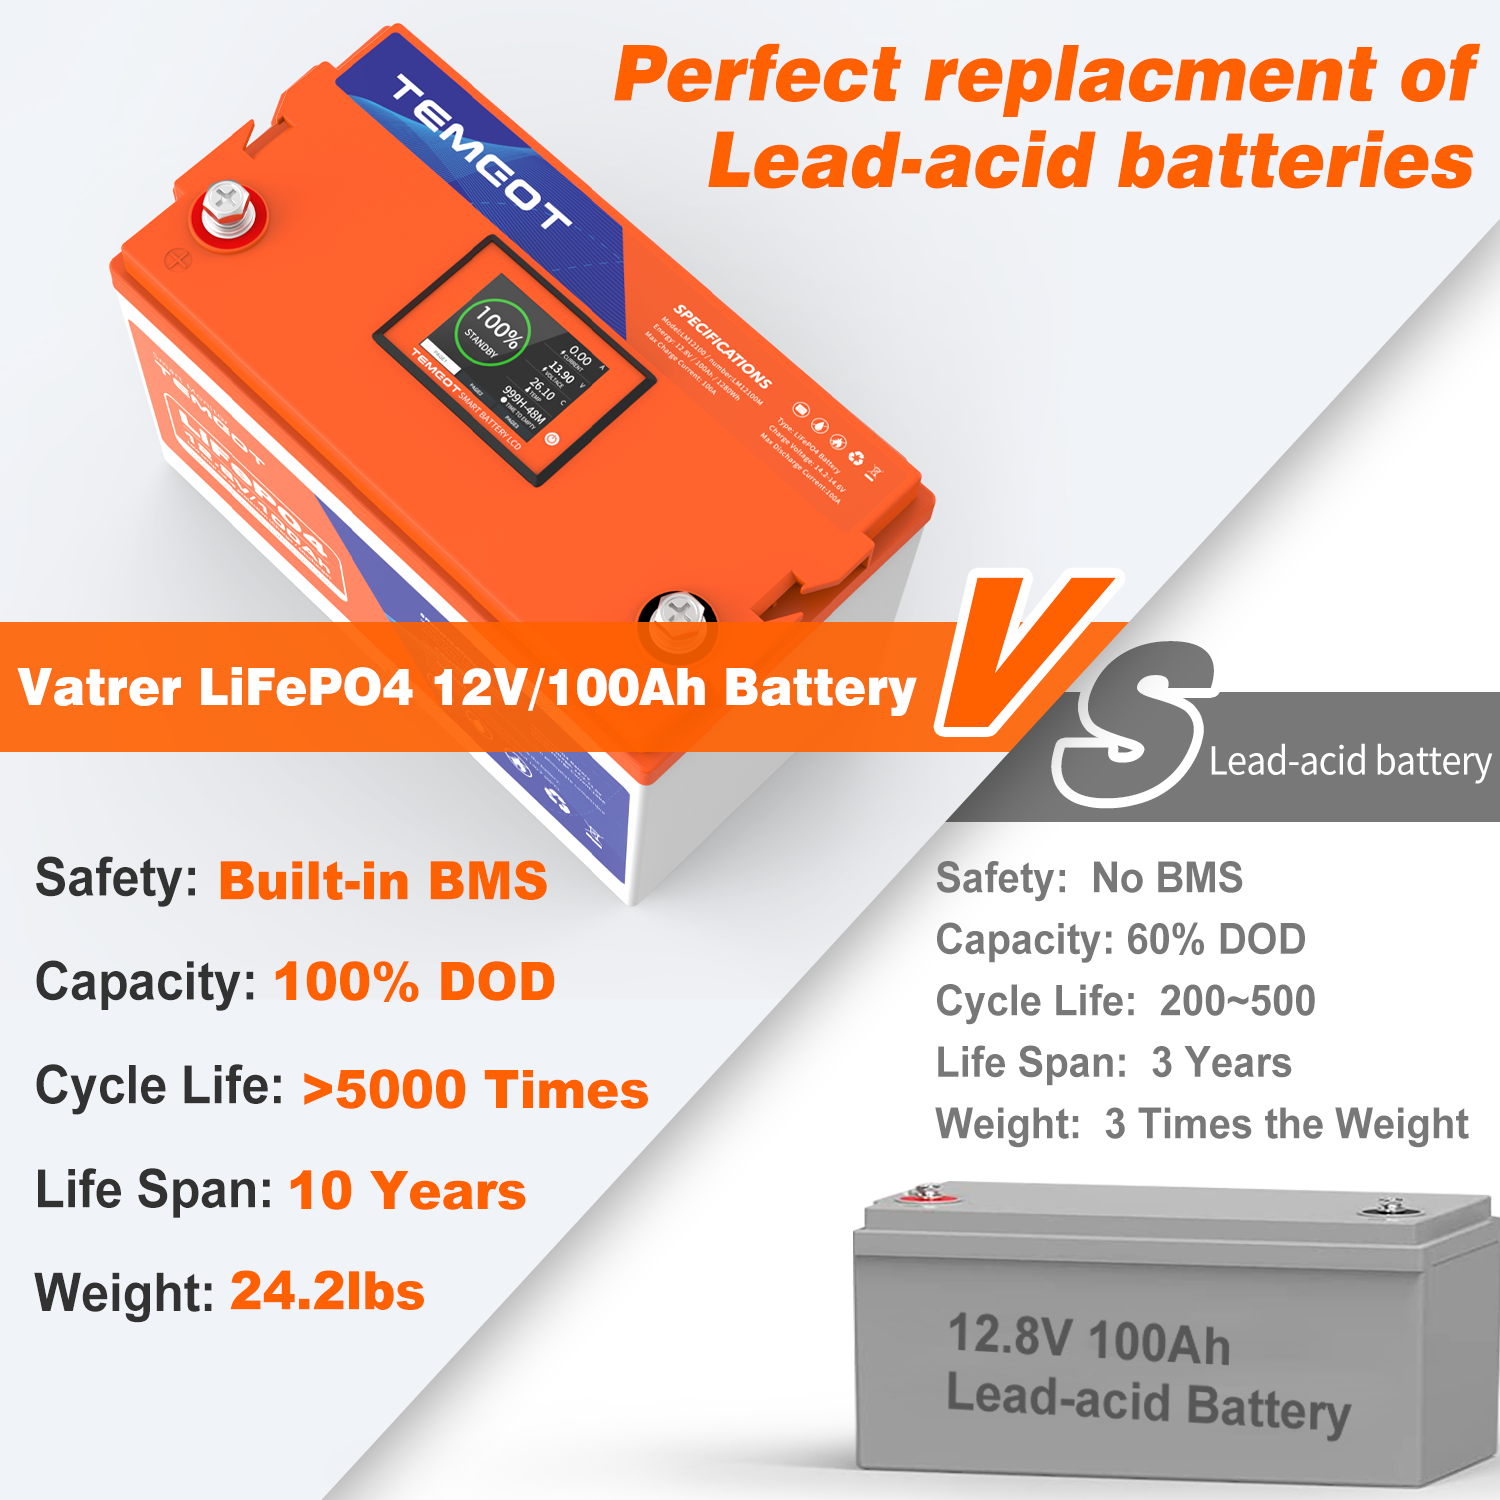 12V 100AH Lithium Battery, Built-in 100A BMS, LiFePO4 Battery Perfect for  Replacing Most of Backup Power, Home Energy Storage and Off-Grid etc.